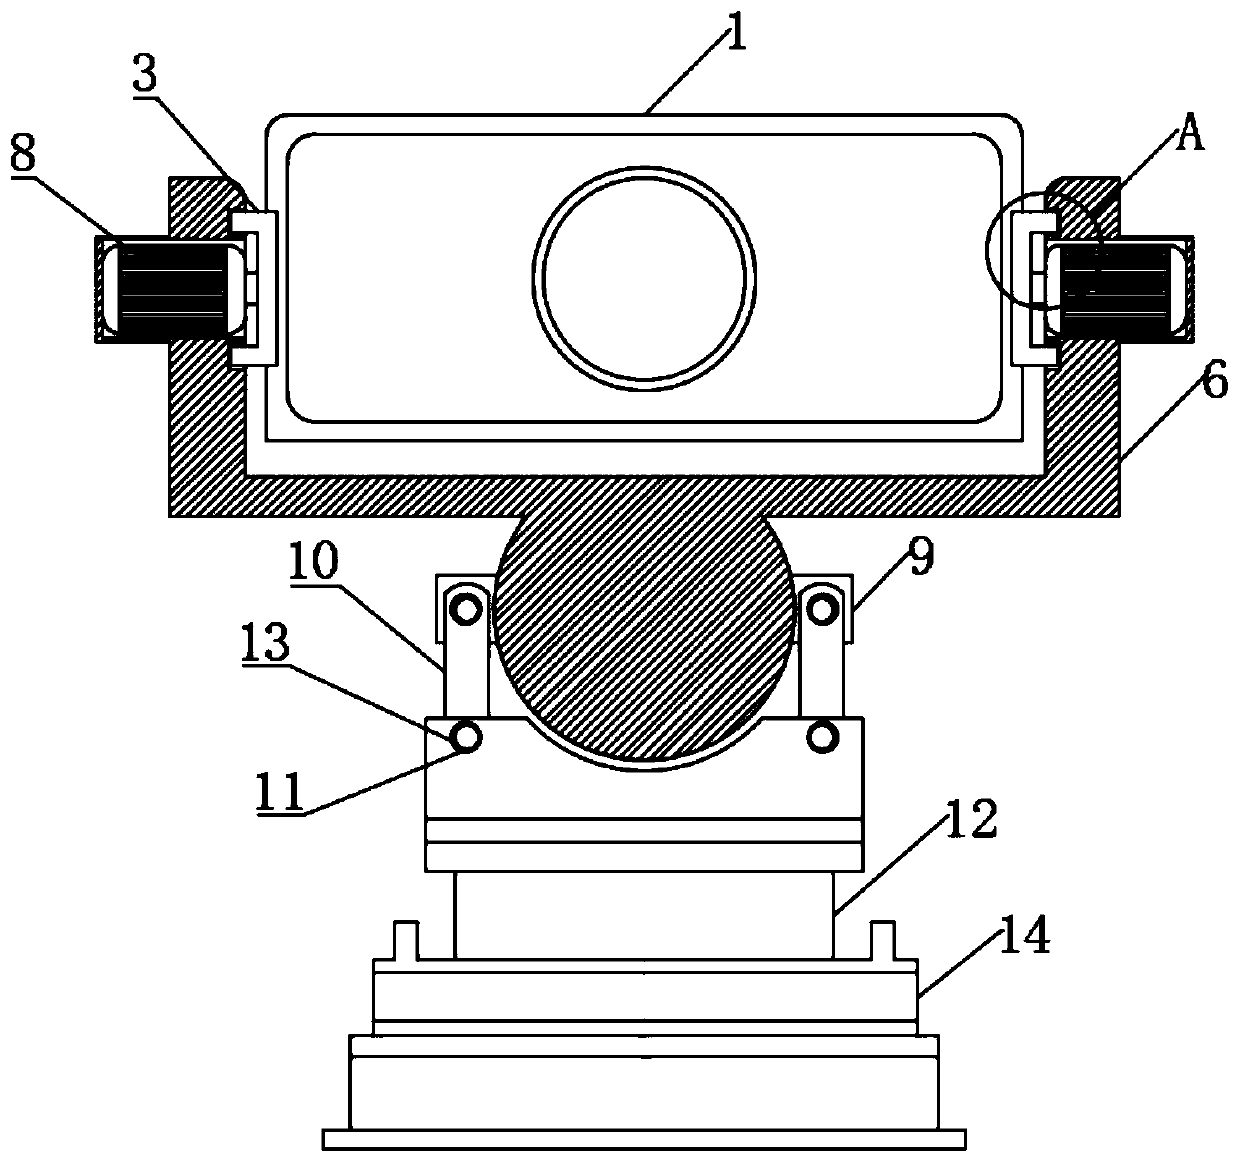 Circular screen type 360-degree panoramic holographic projection display device